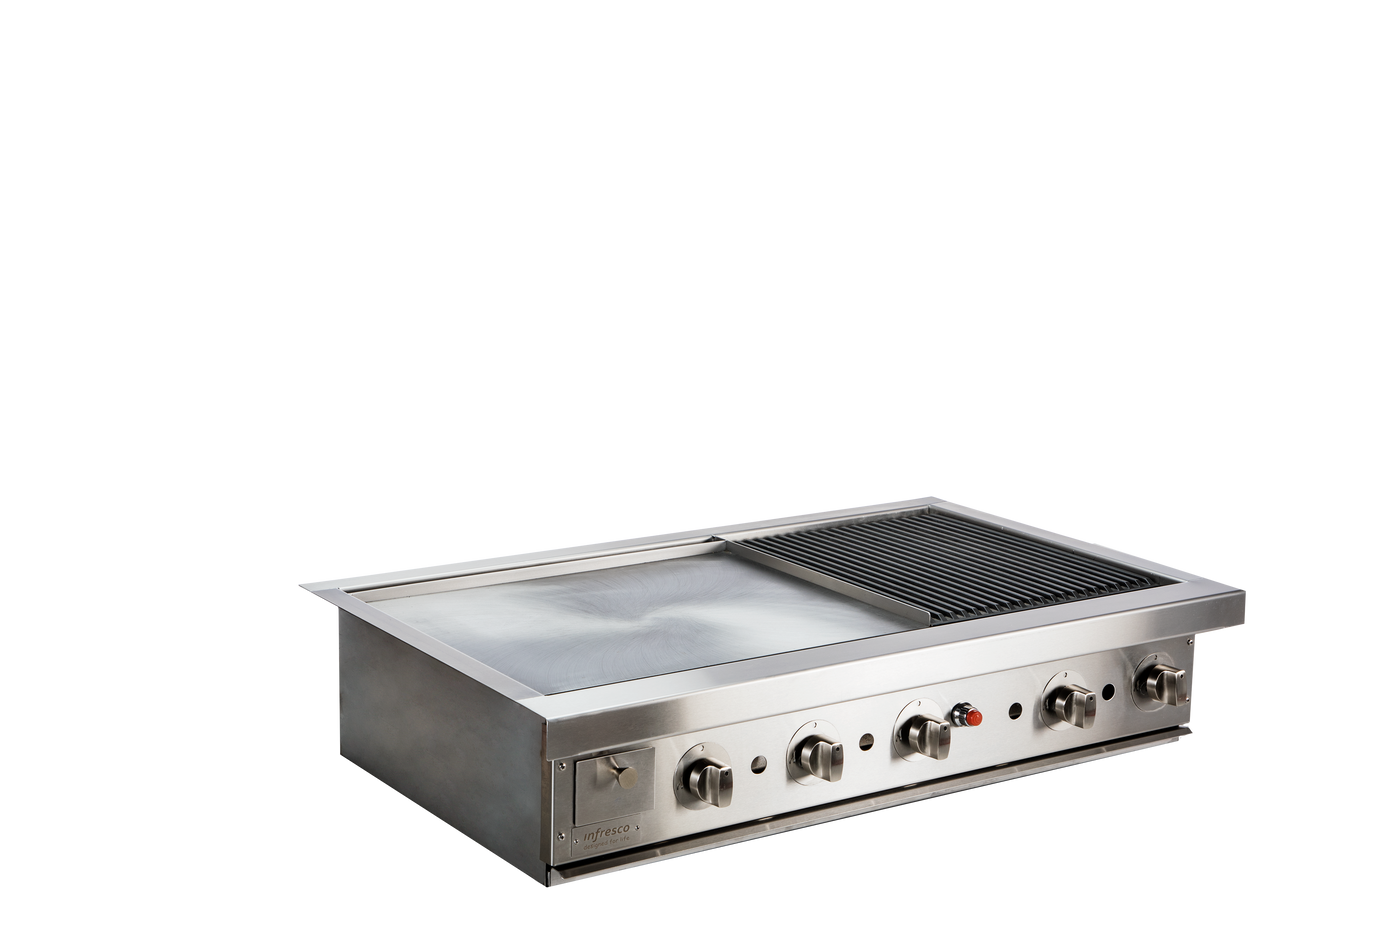 Infresco 985mm Gourmet Barbecue 5 burner Hotplate and Grill with Flat Lid